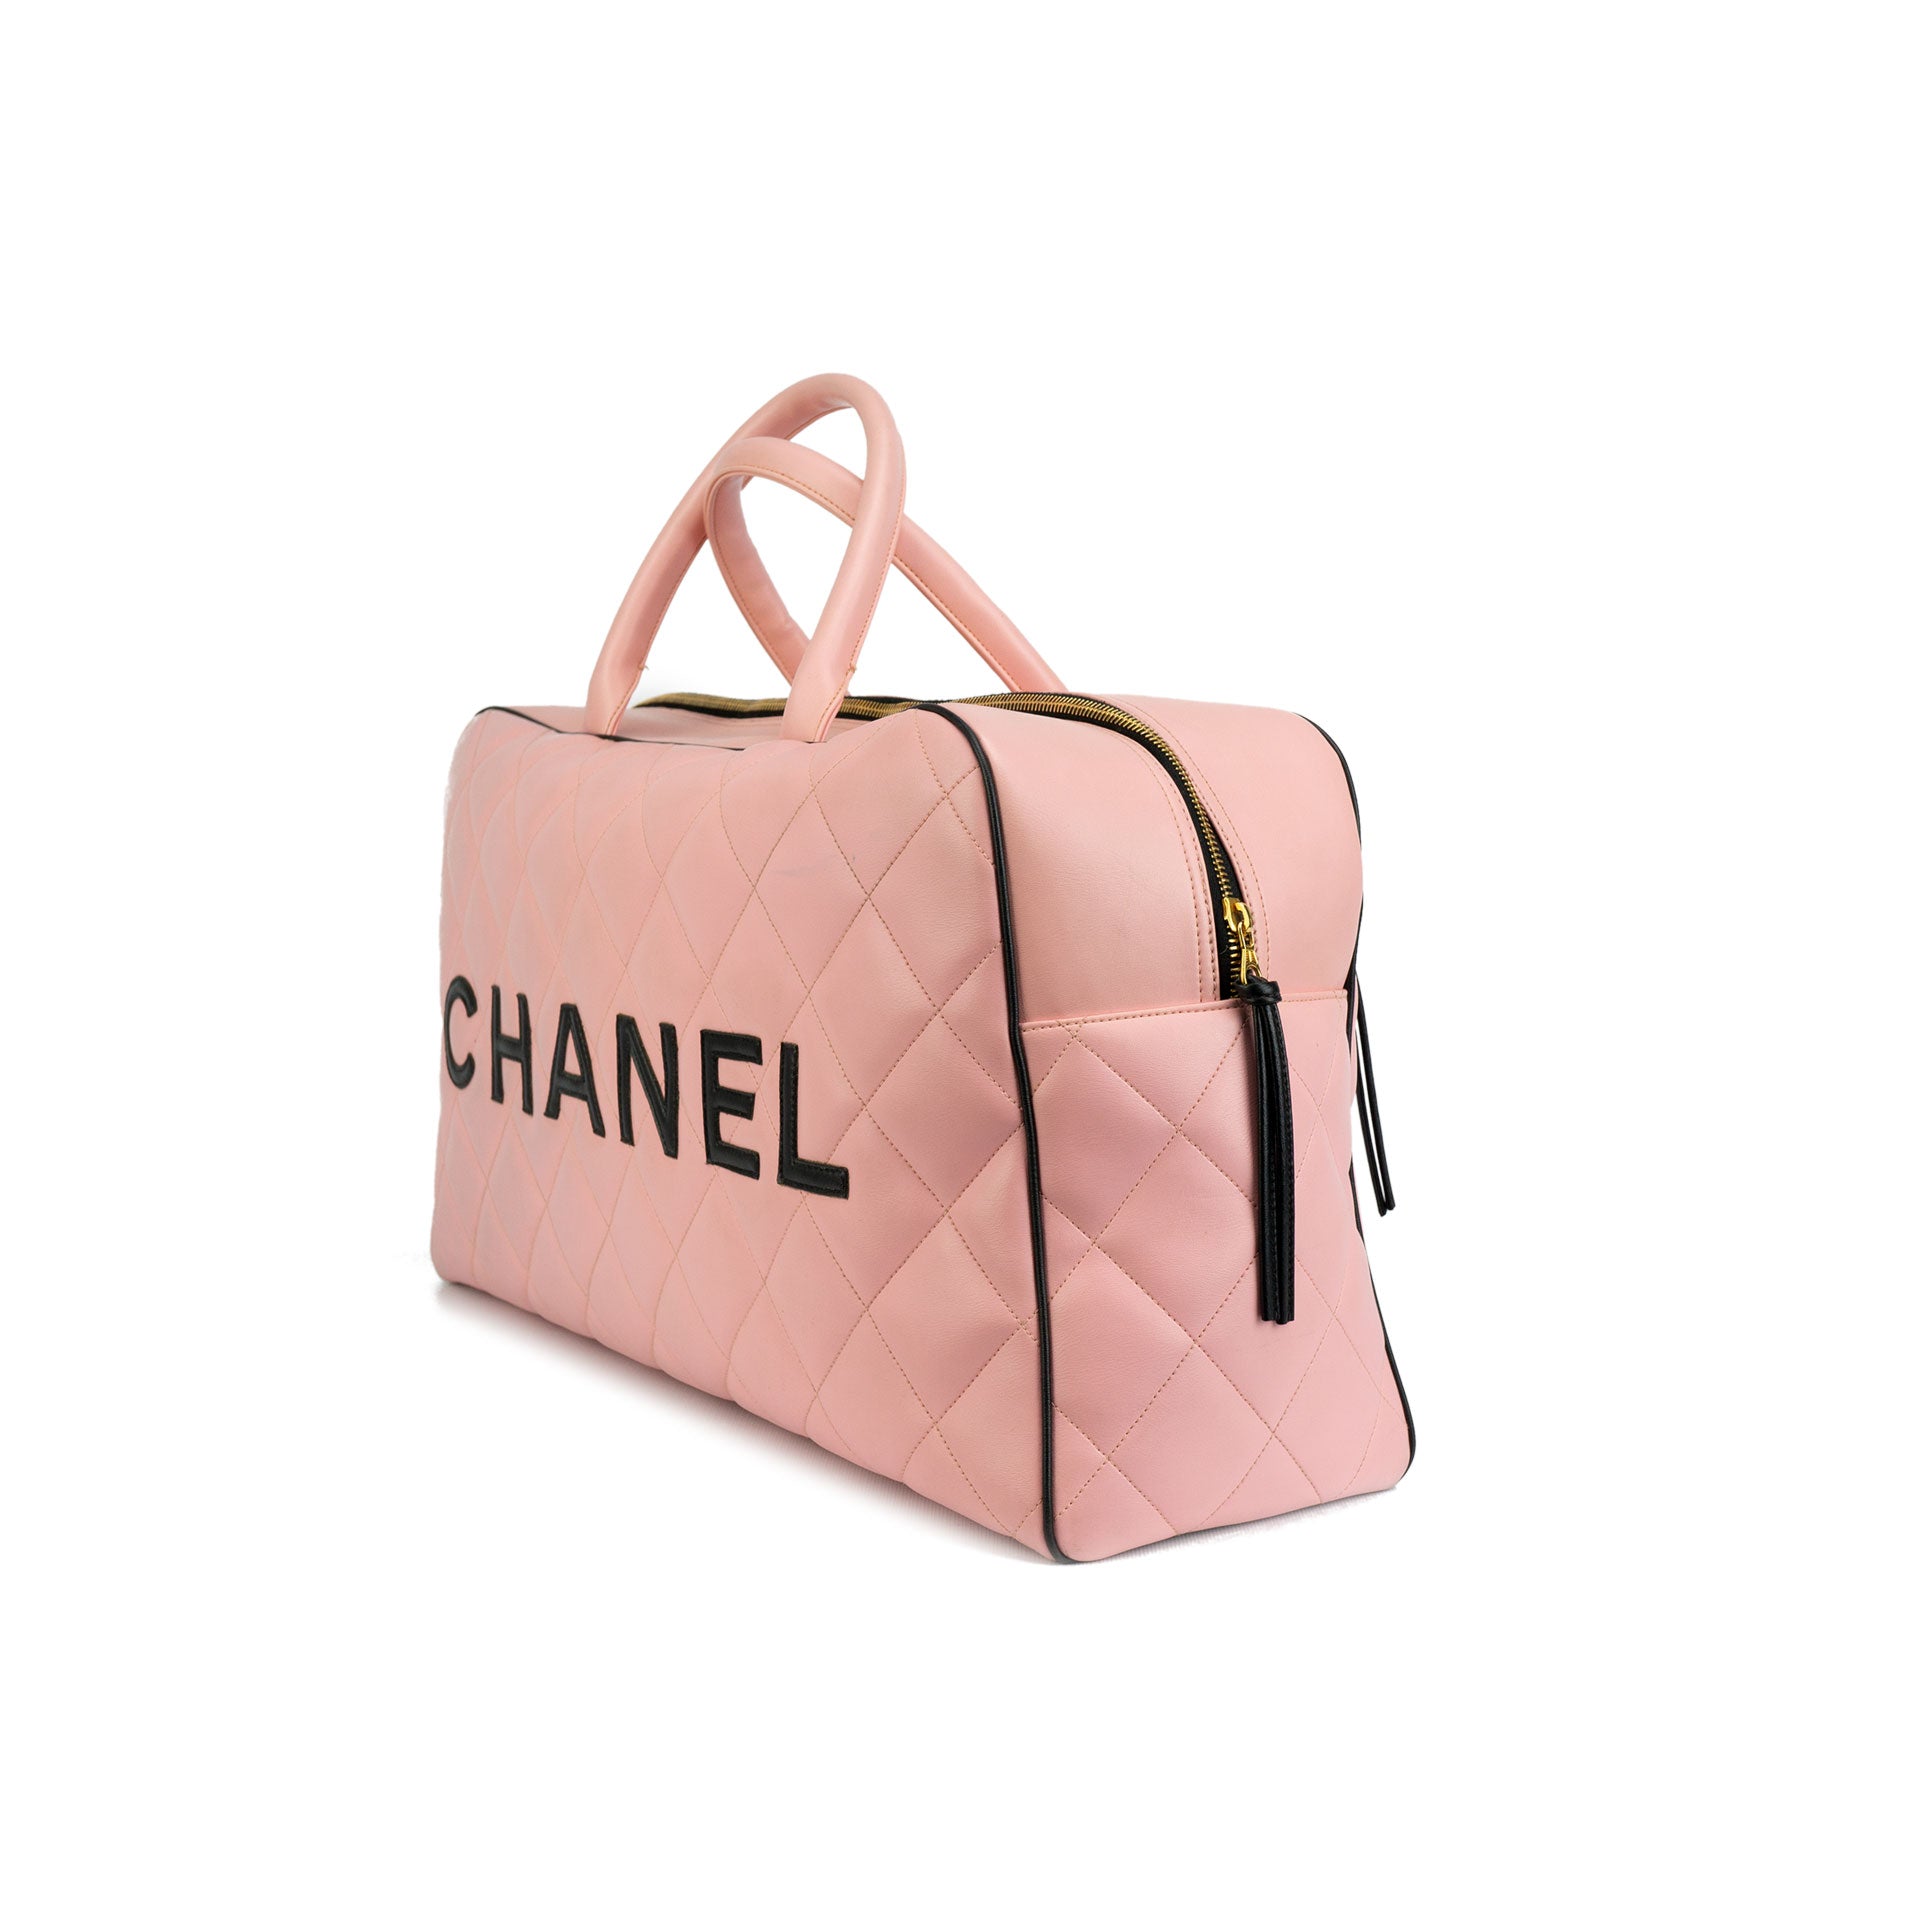 50 Bags and Prices from Chanels TravelThemed Spring 2016 Collection  in Stores Now  PurseBlog  Chanel luggage Chanel handbags Chanel clutch